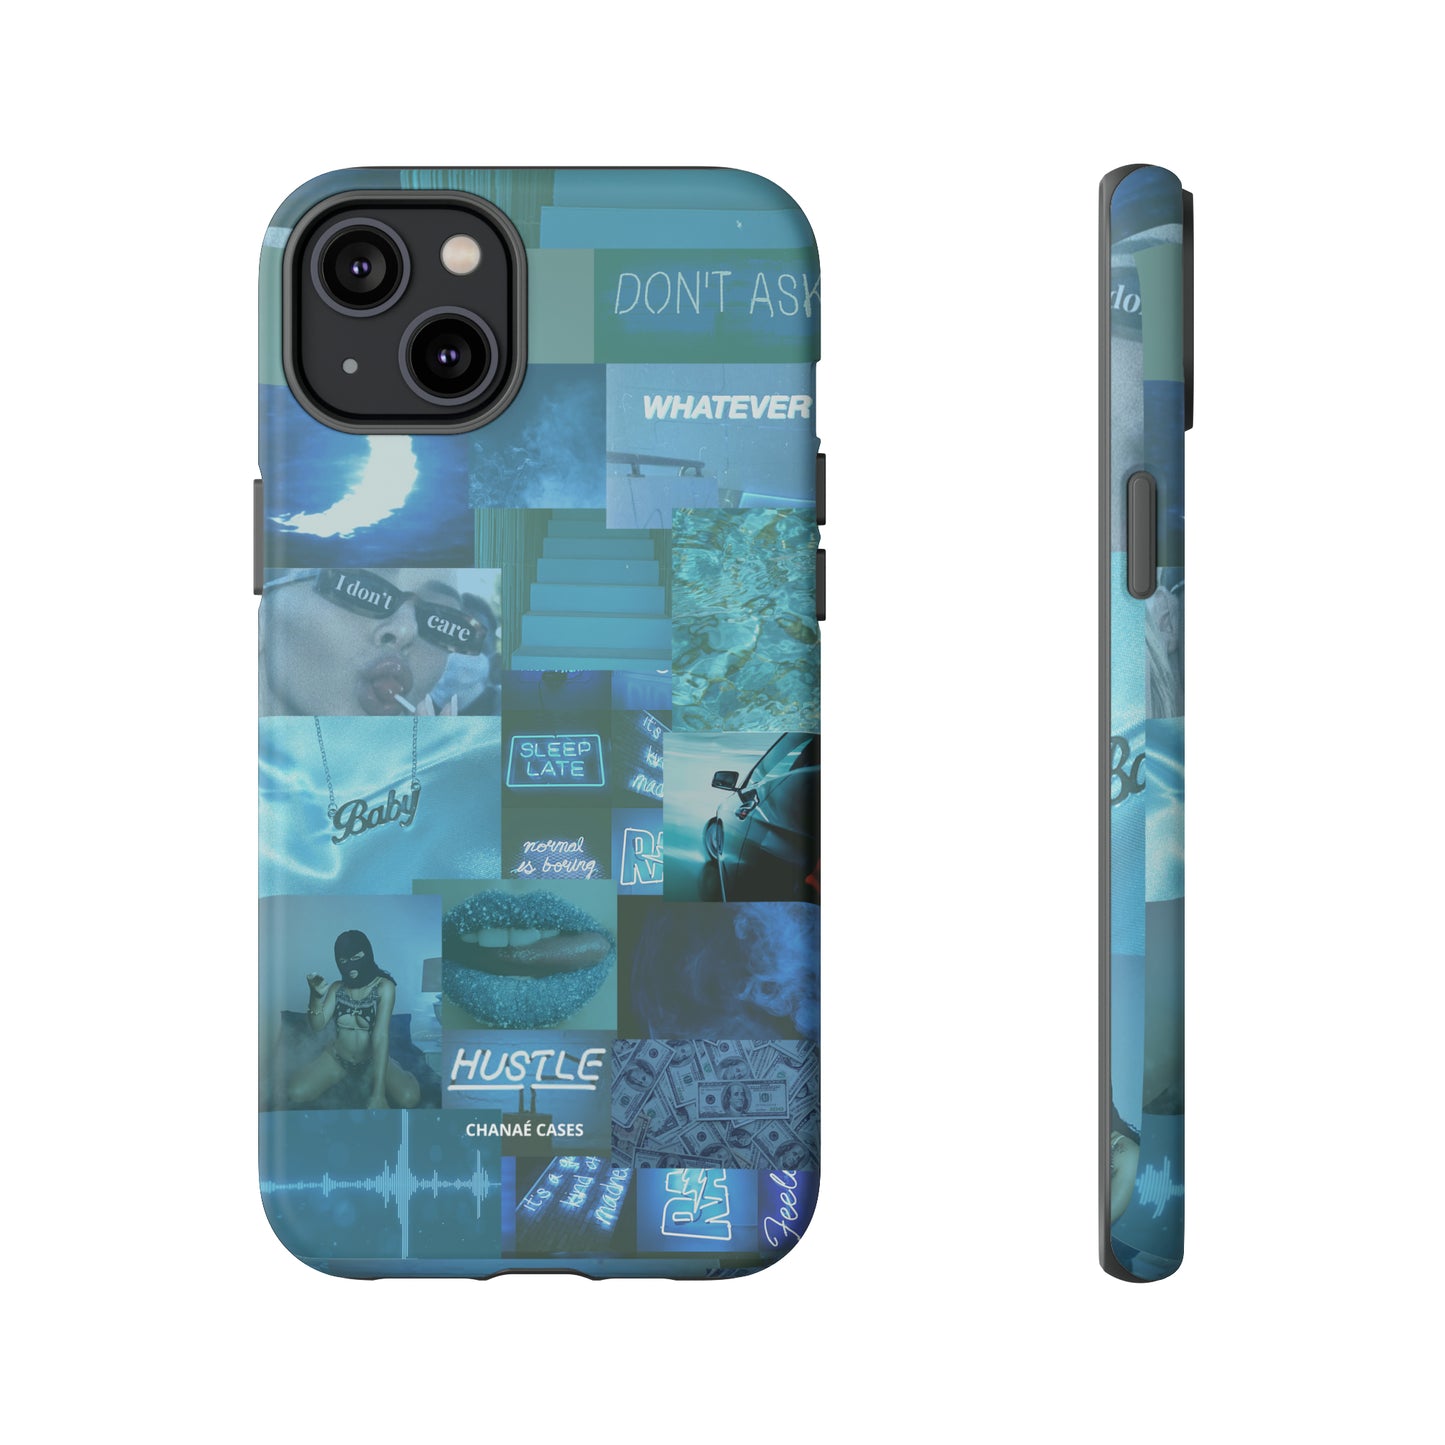 Dayjuh Aesthetic iPhone "Tough" Case (Blue)